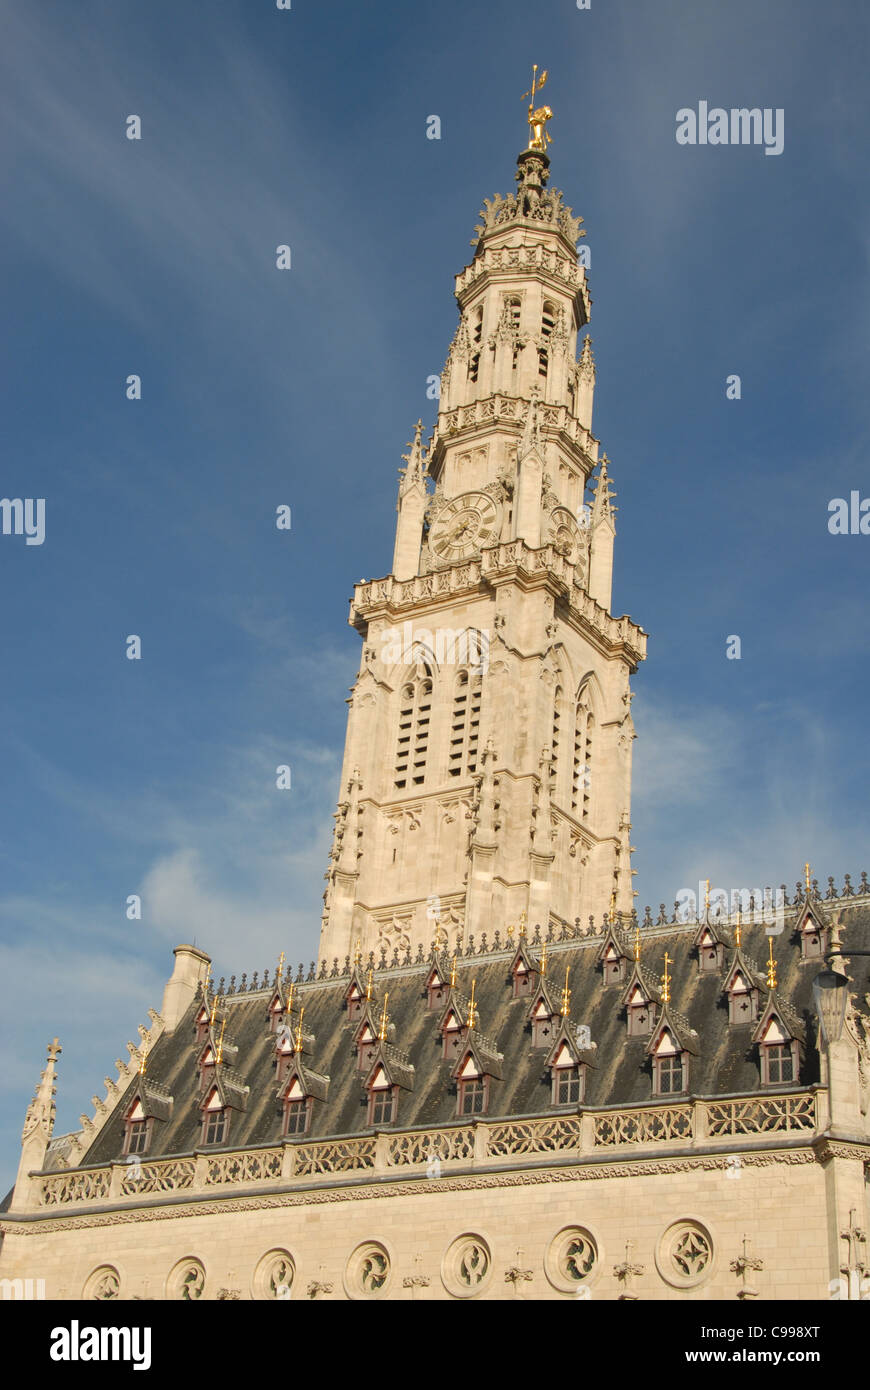 Belfry or tower of the town hall at the Place des Héros in Arras of Nord-Pas de Calais in France Stock Photo